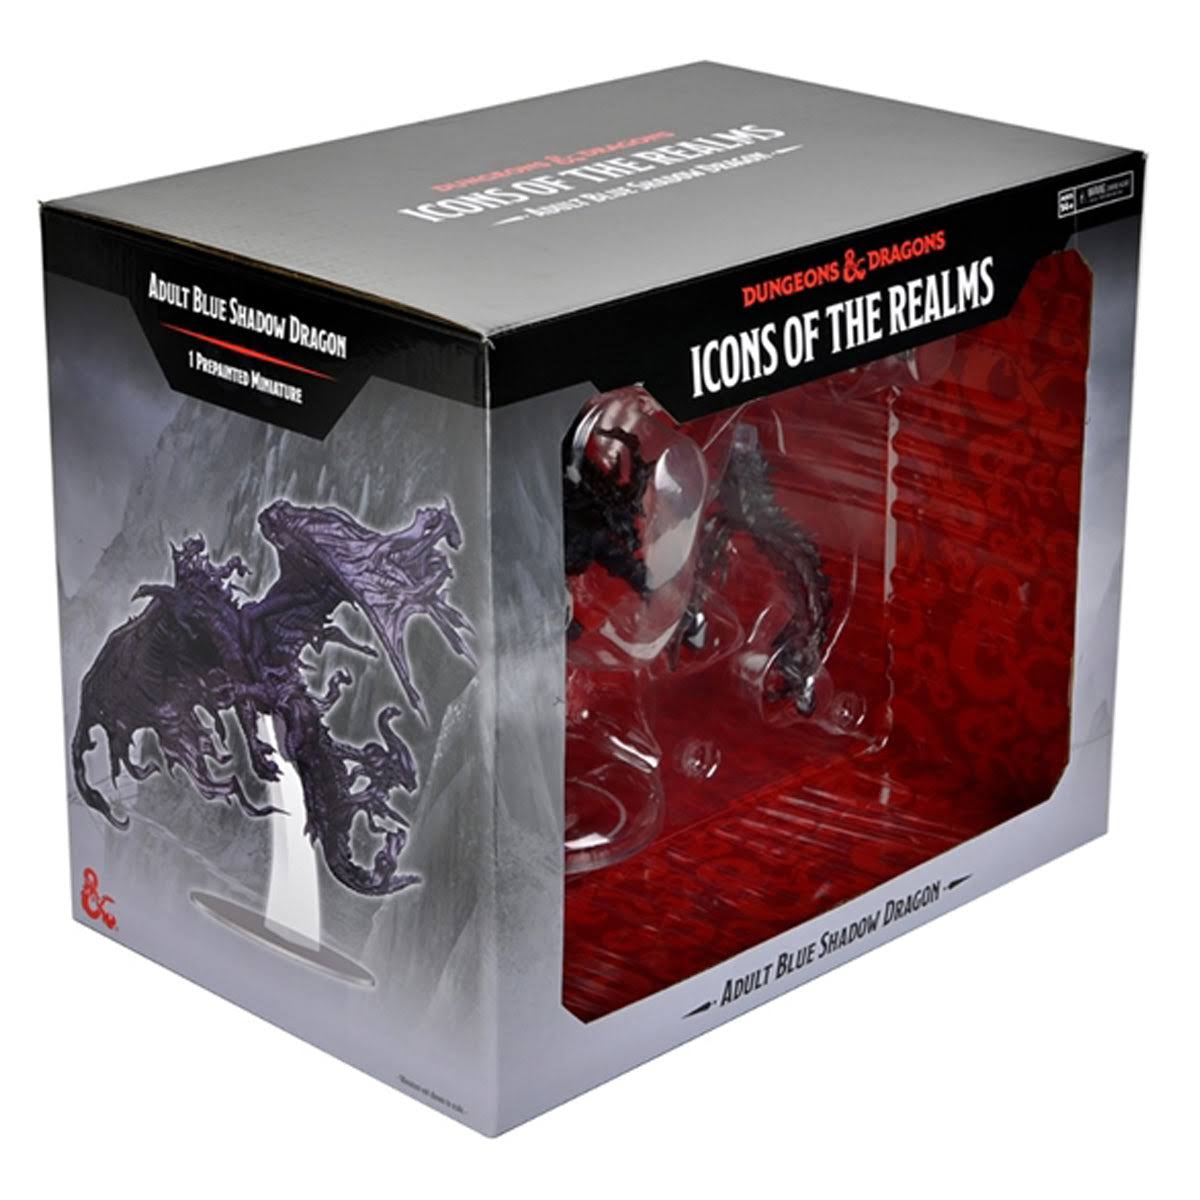 Dungeons & Dragons: Icons of The Realms - Adult Blue Shadow Dragon